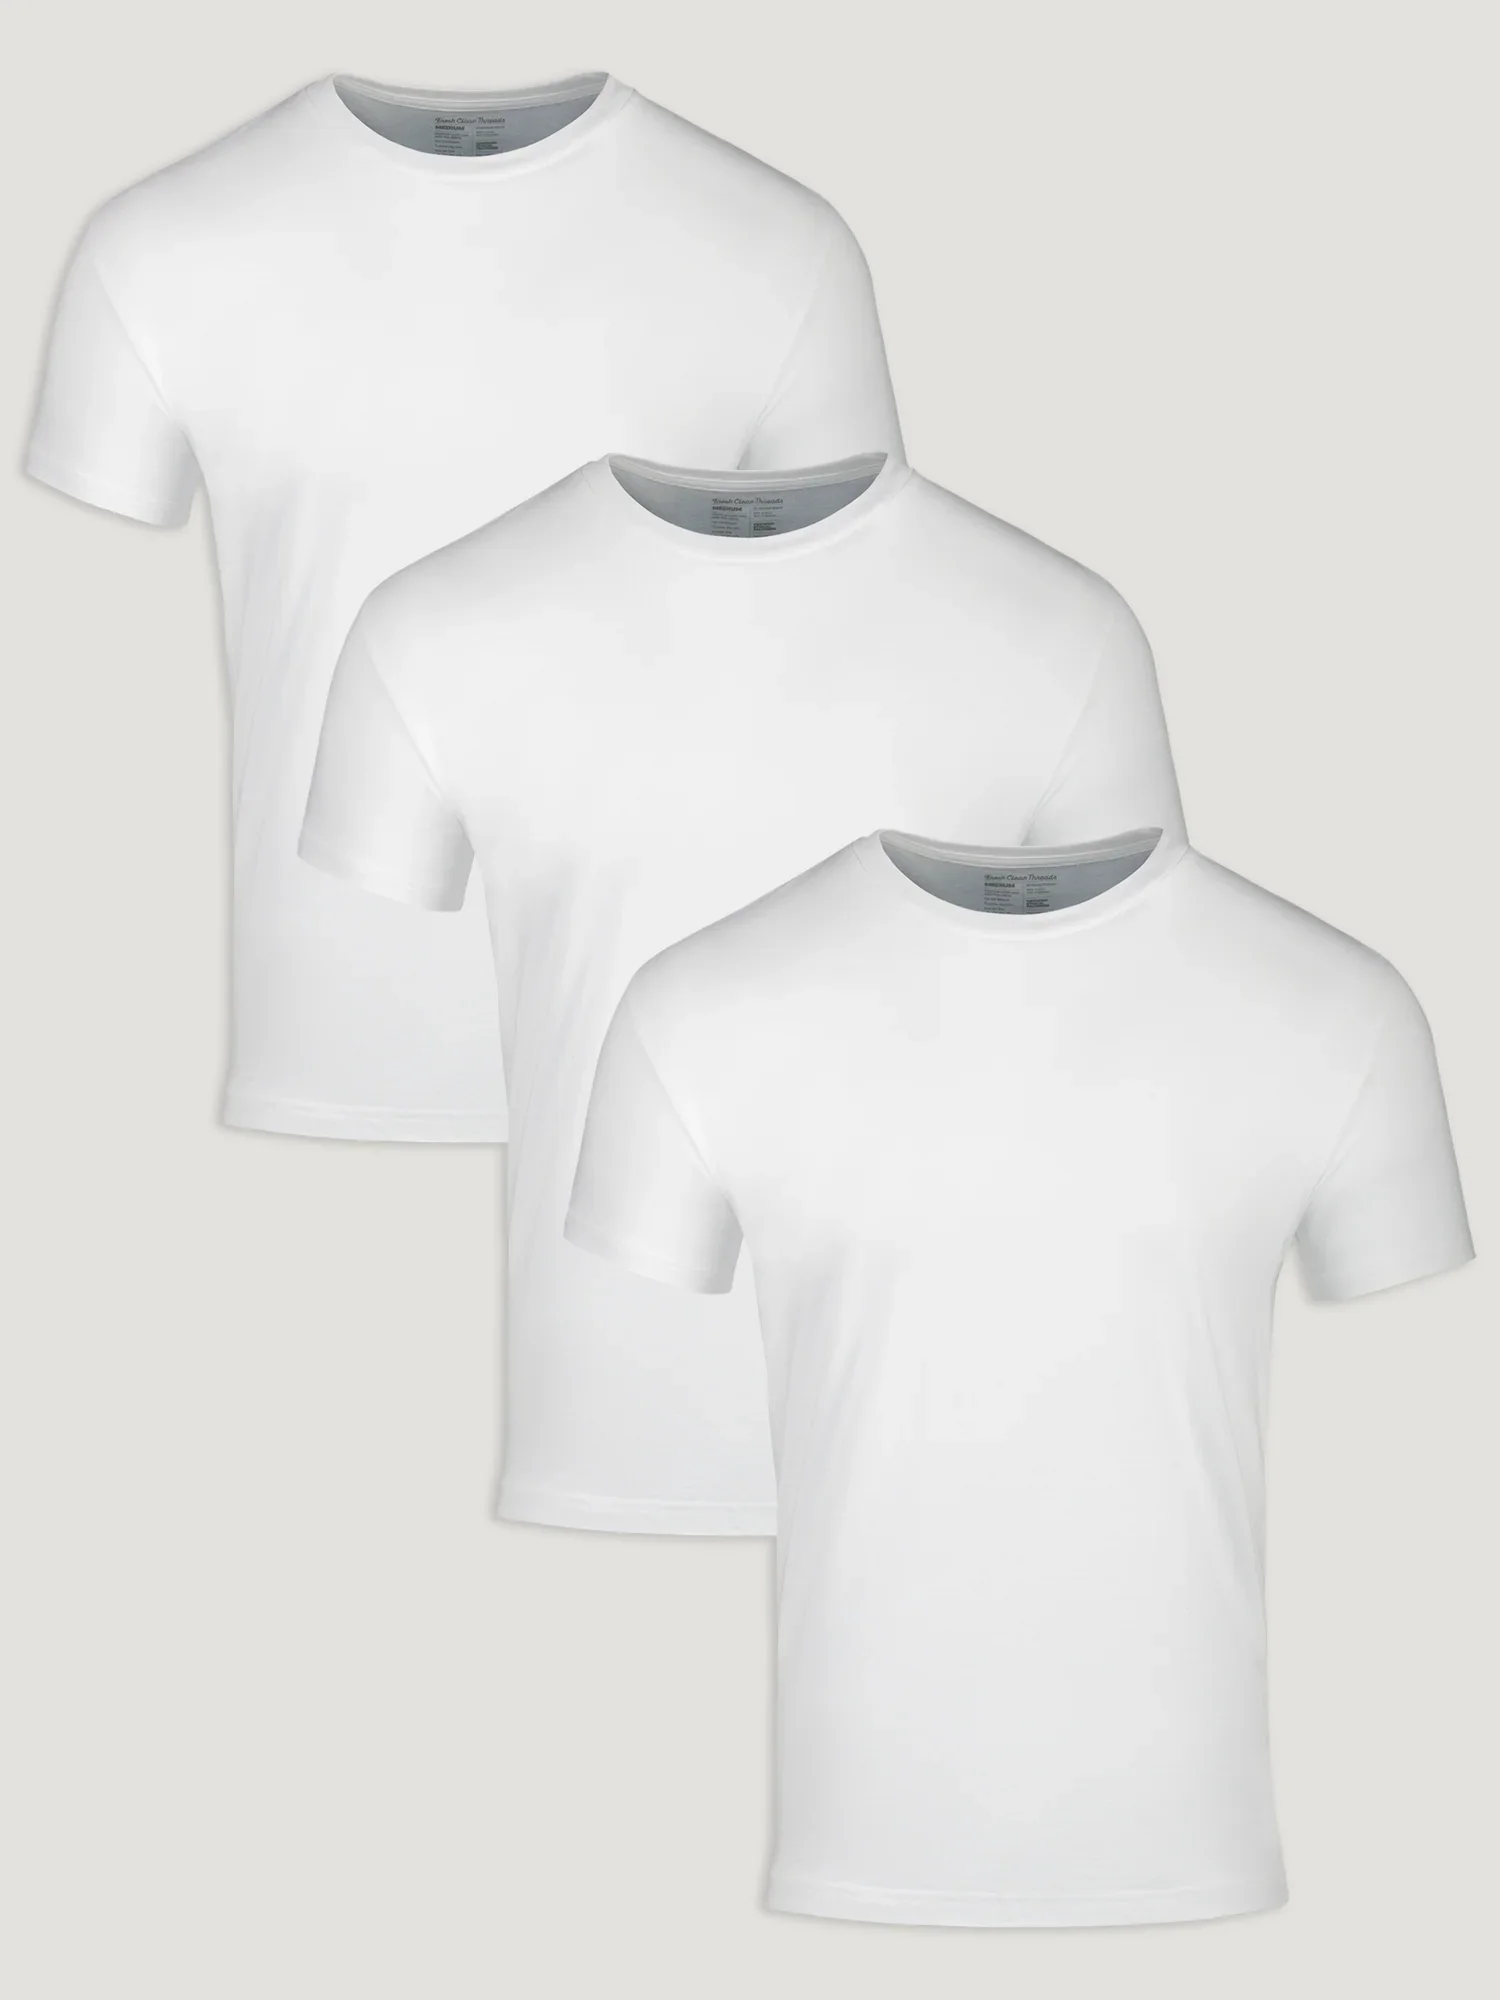 Image of All White 3-Pack